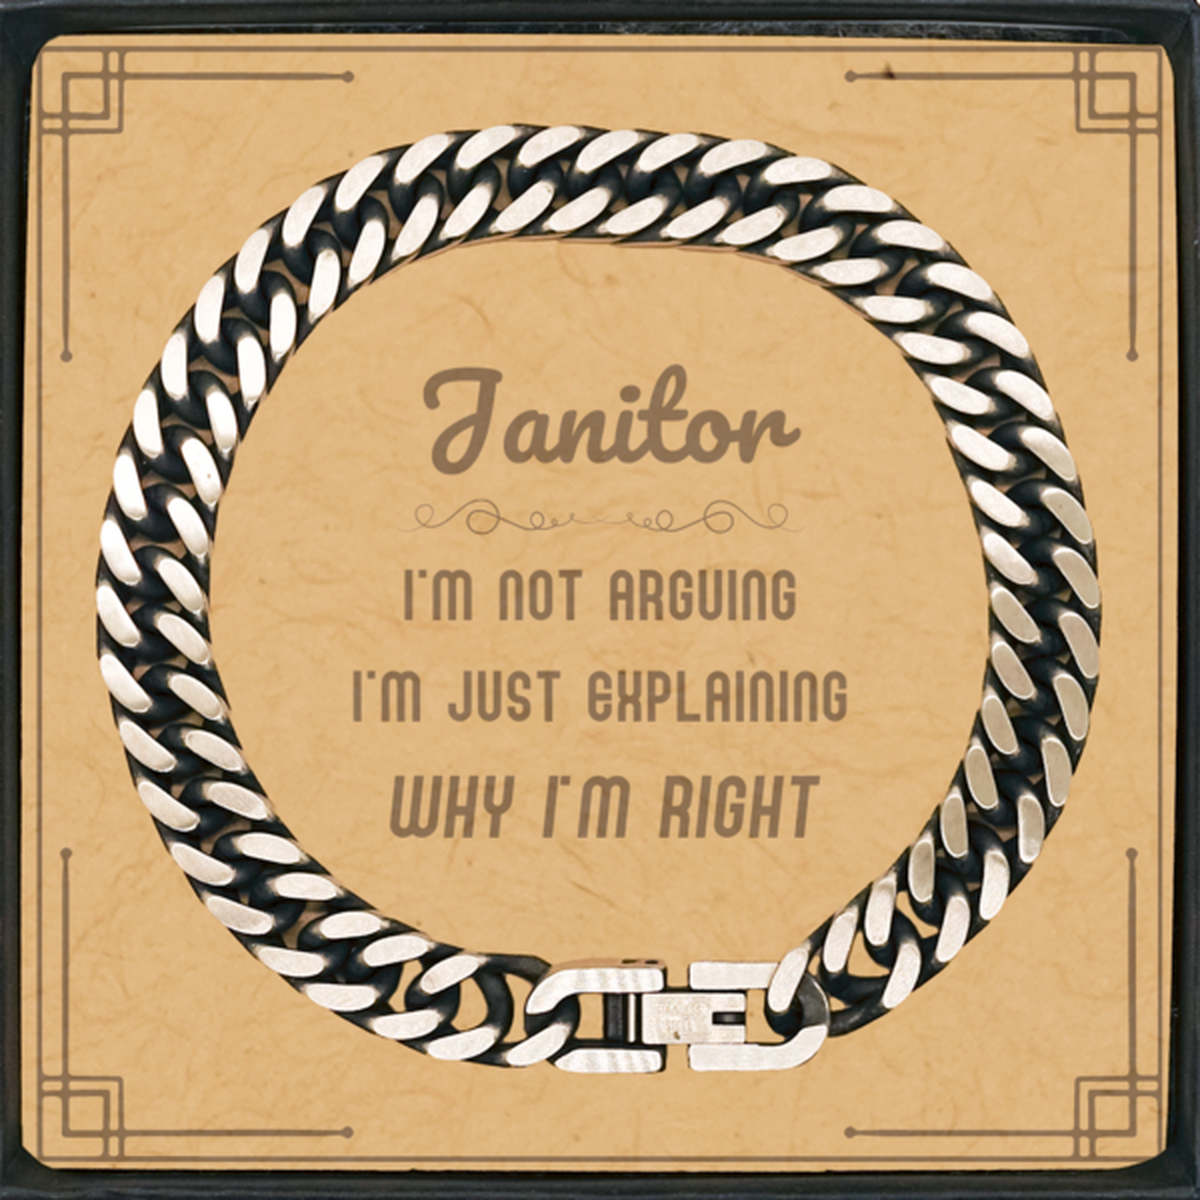 Janitor I'm not Arguing. I'm Just Explaining Why I'm RIGHT Cuban Link Chain Bracelet, Funny Saying Quote Janitor Gifts For Janitor Message Card Graduation Birthday Christmas Gifts for Men Women Coworker